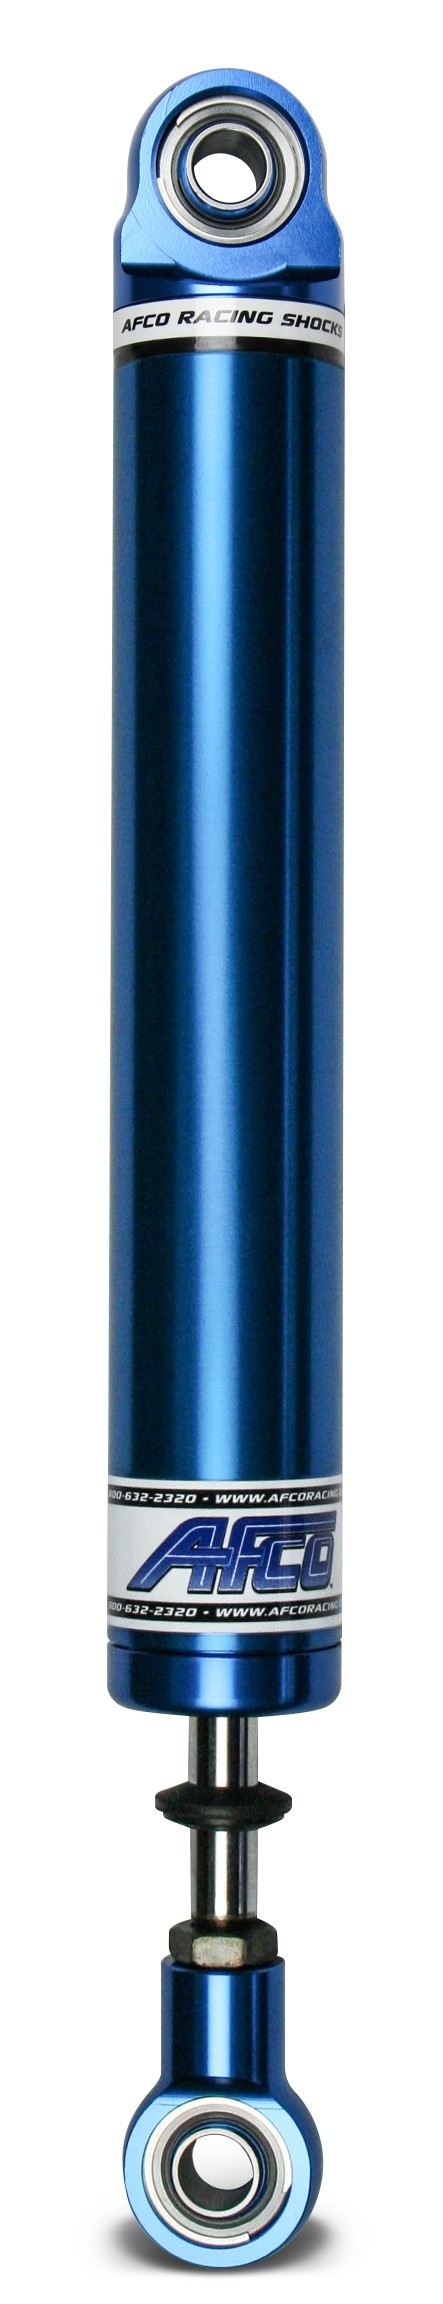 Aluminum Shock Twin Tube 16 Series Small Body 6 Inch Comp 4/Reb 4 Rough Track  